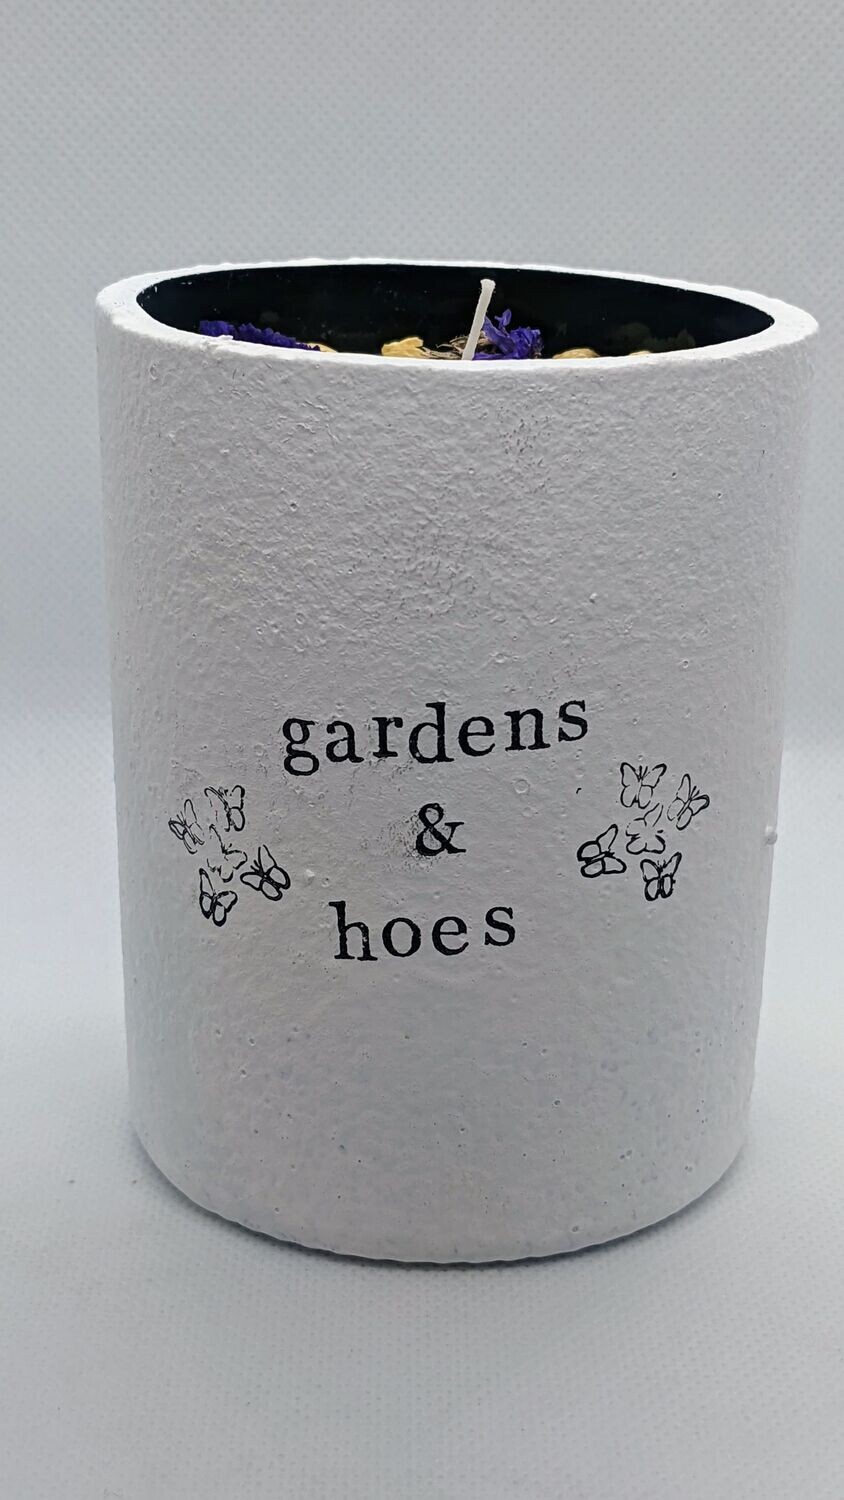 "Gardens & Hoes" clary sage soy wax candle with dried flowers and cotton wick